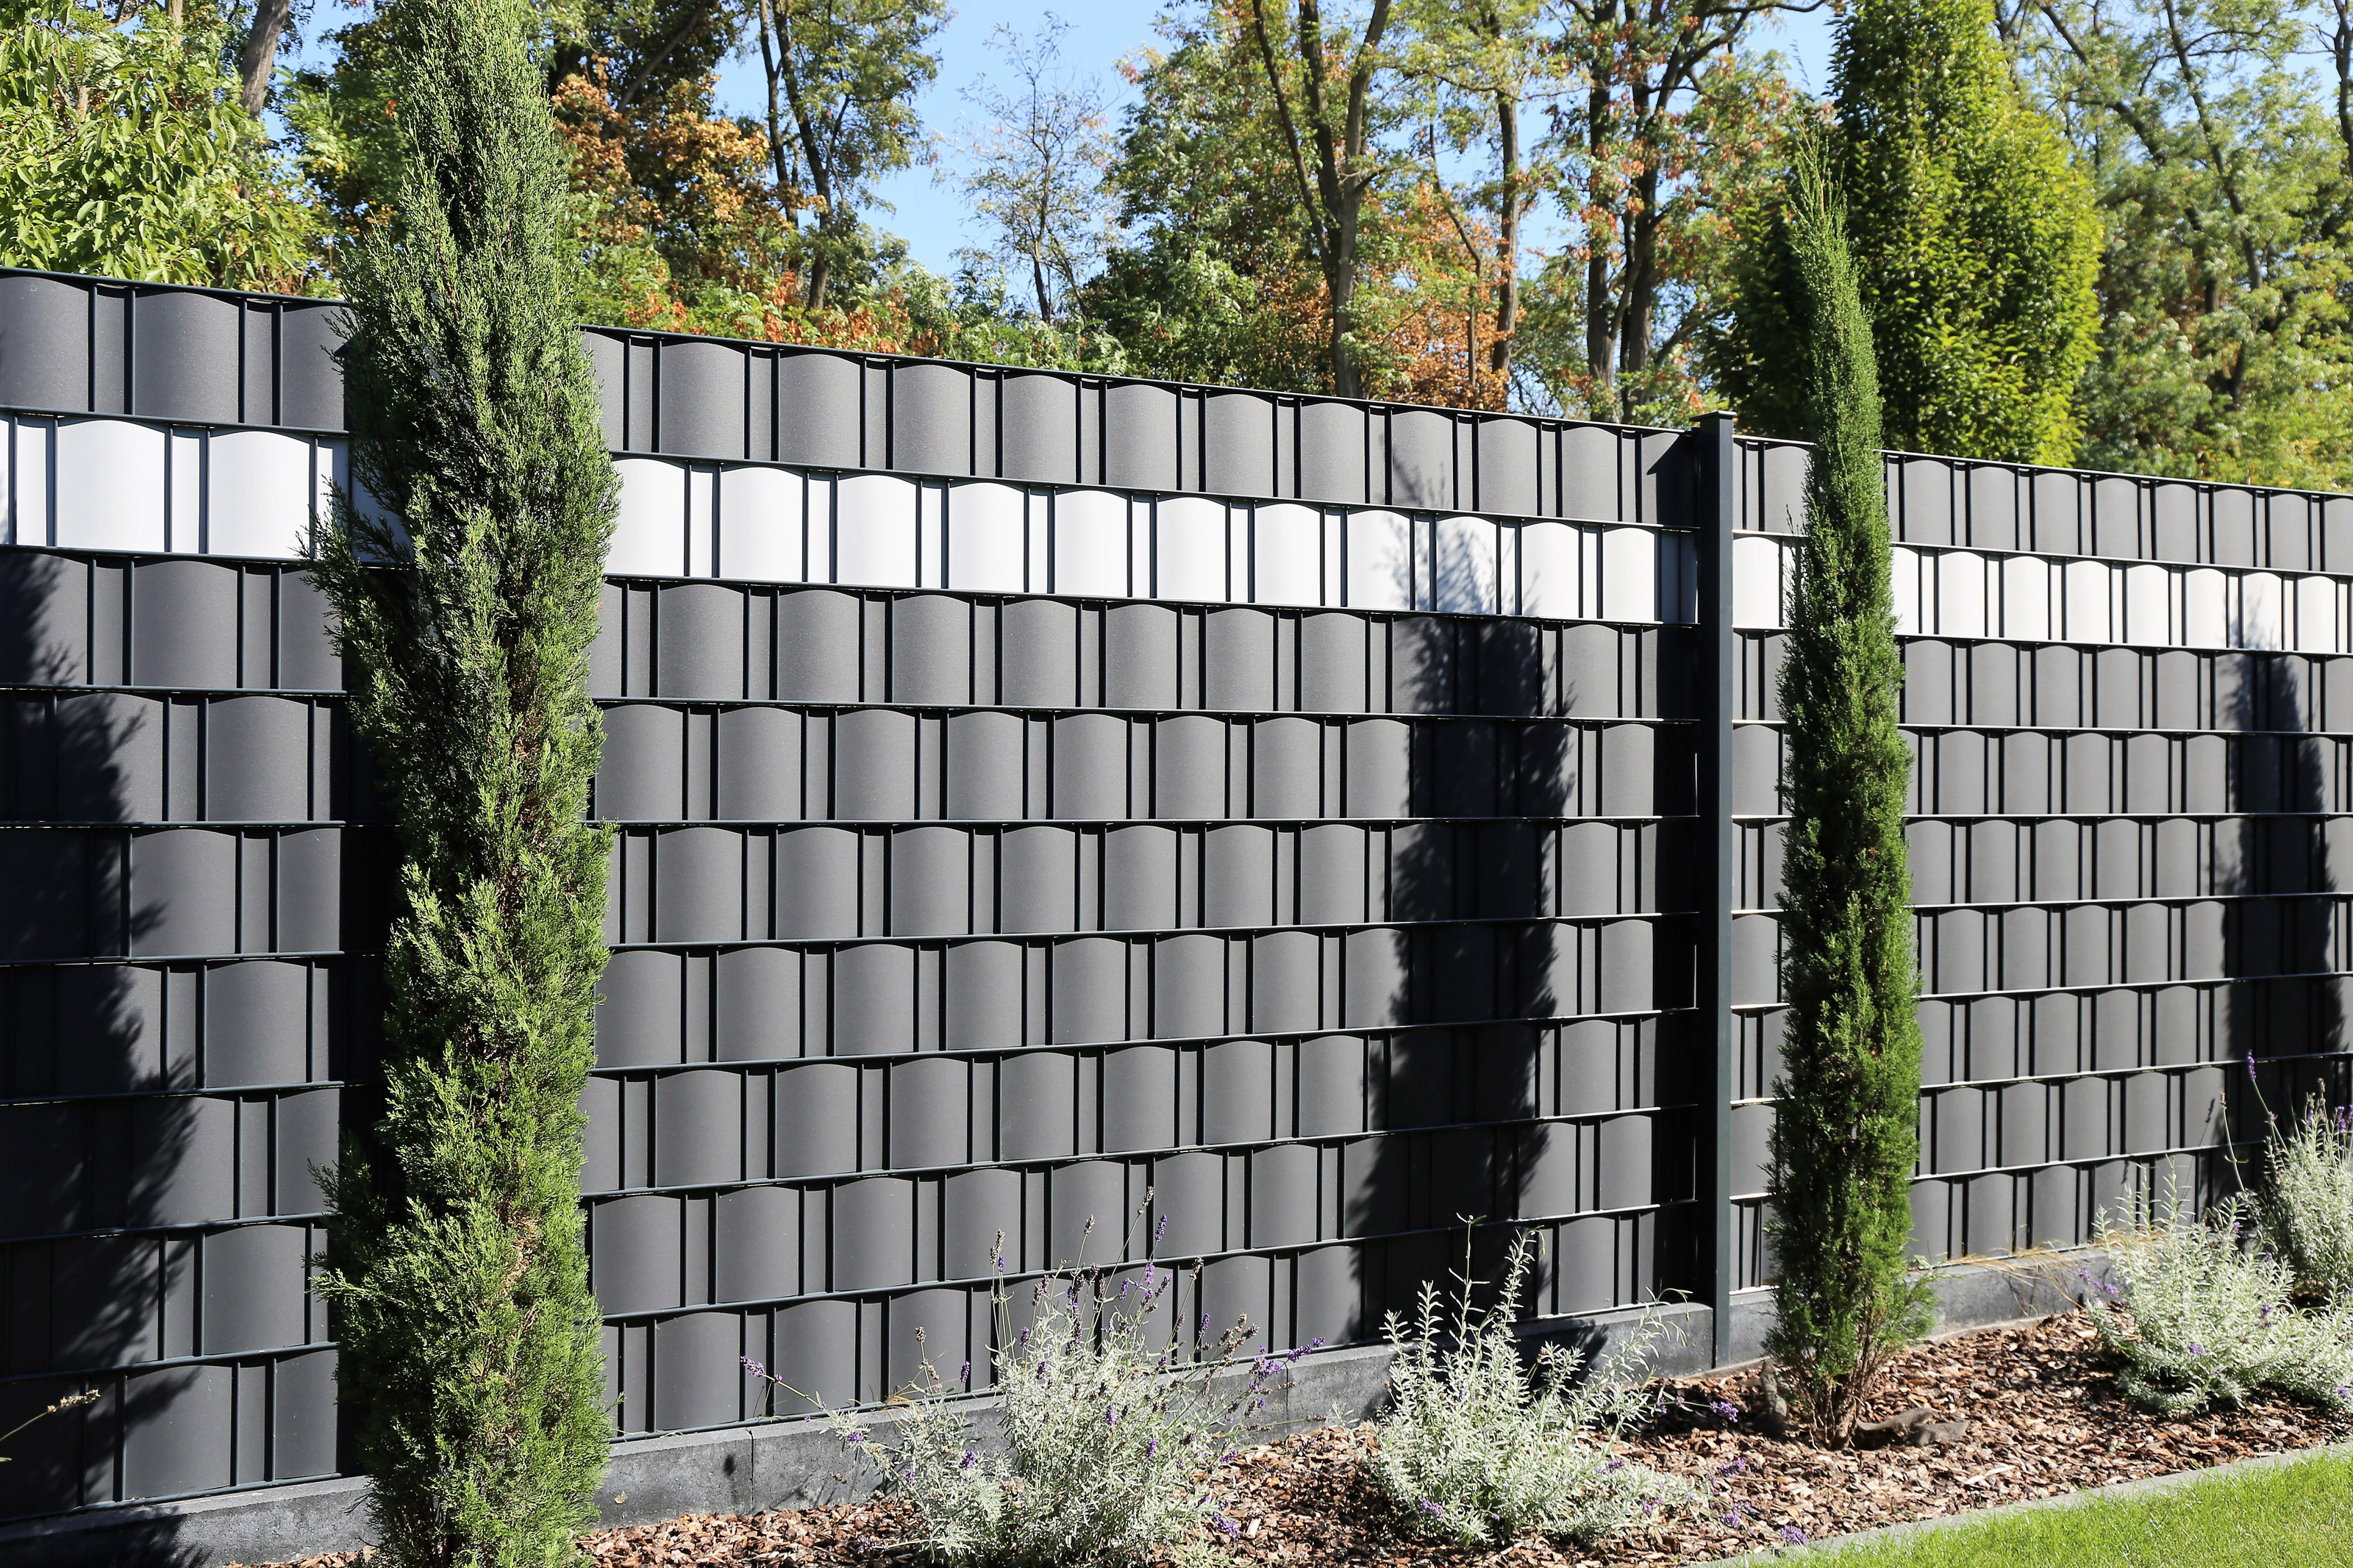 Modern privacy fence with ridged texture and a flower bed in front.